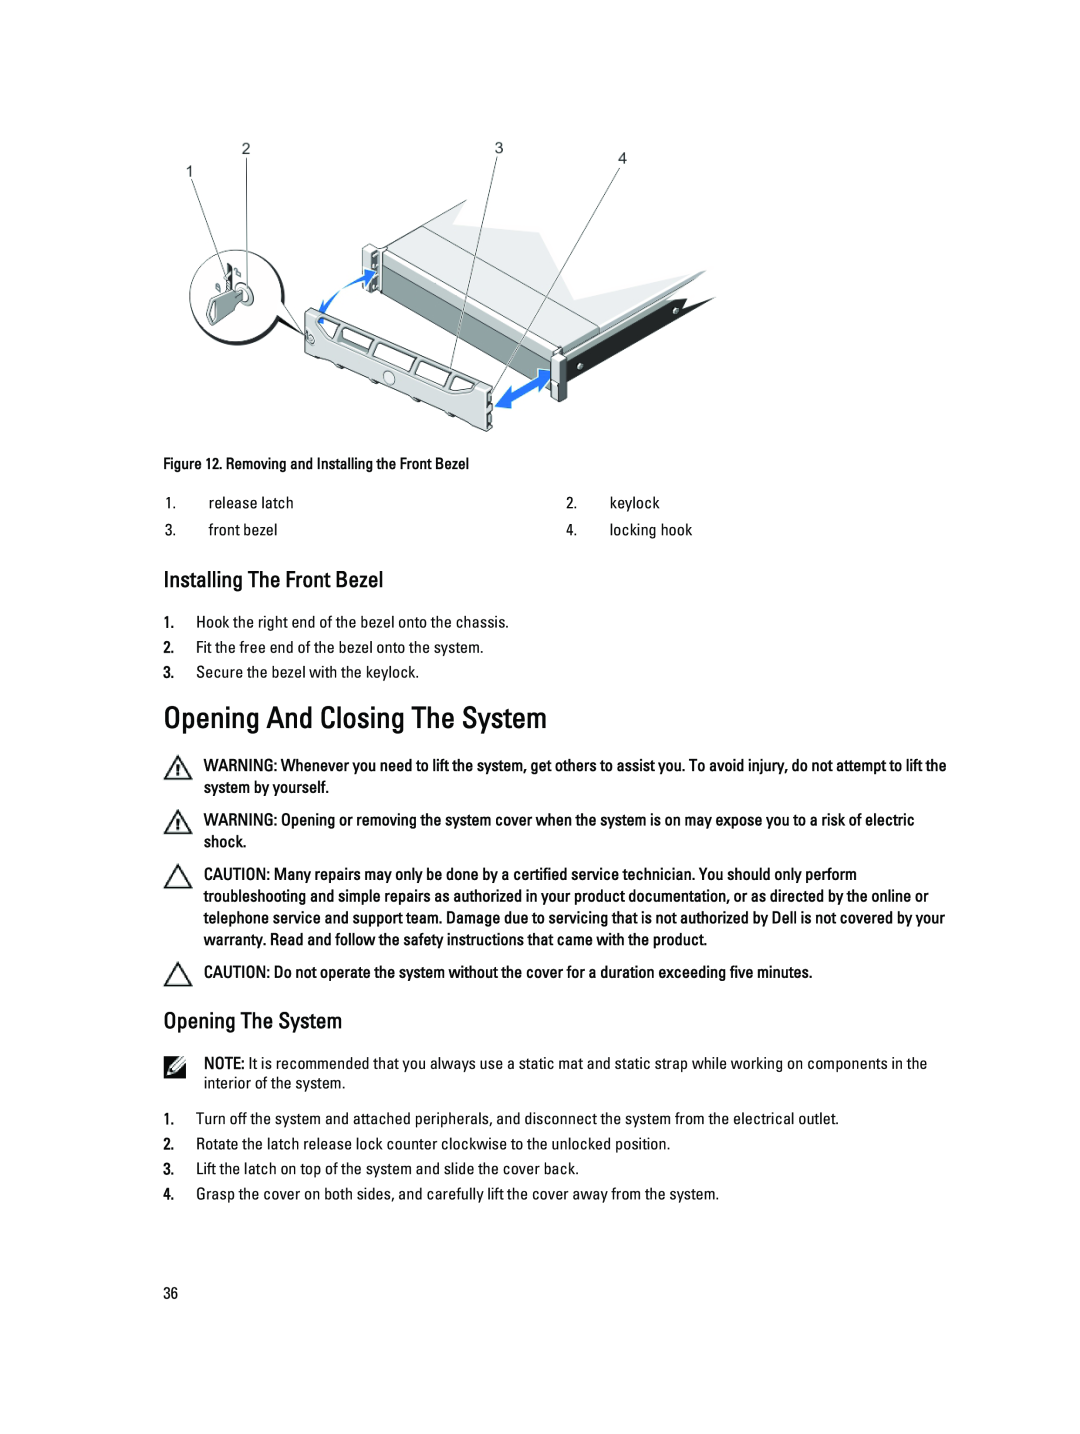 Dell R720XD owner manual Opening And Closing The System, Installing The Front Bezel, Opening The System 